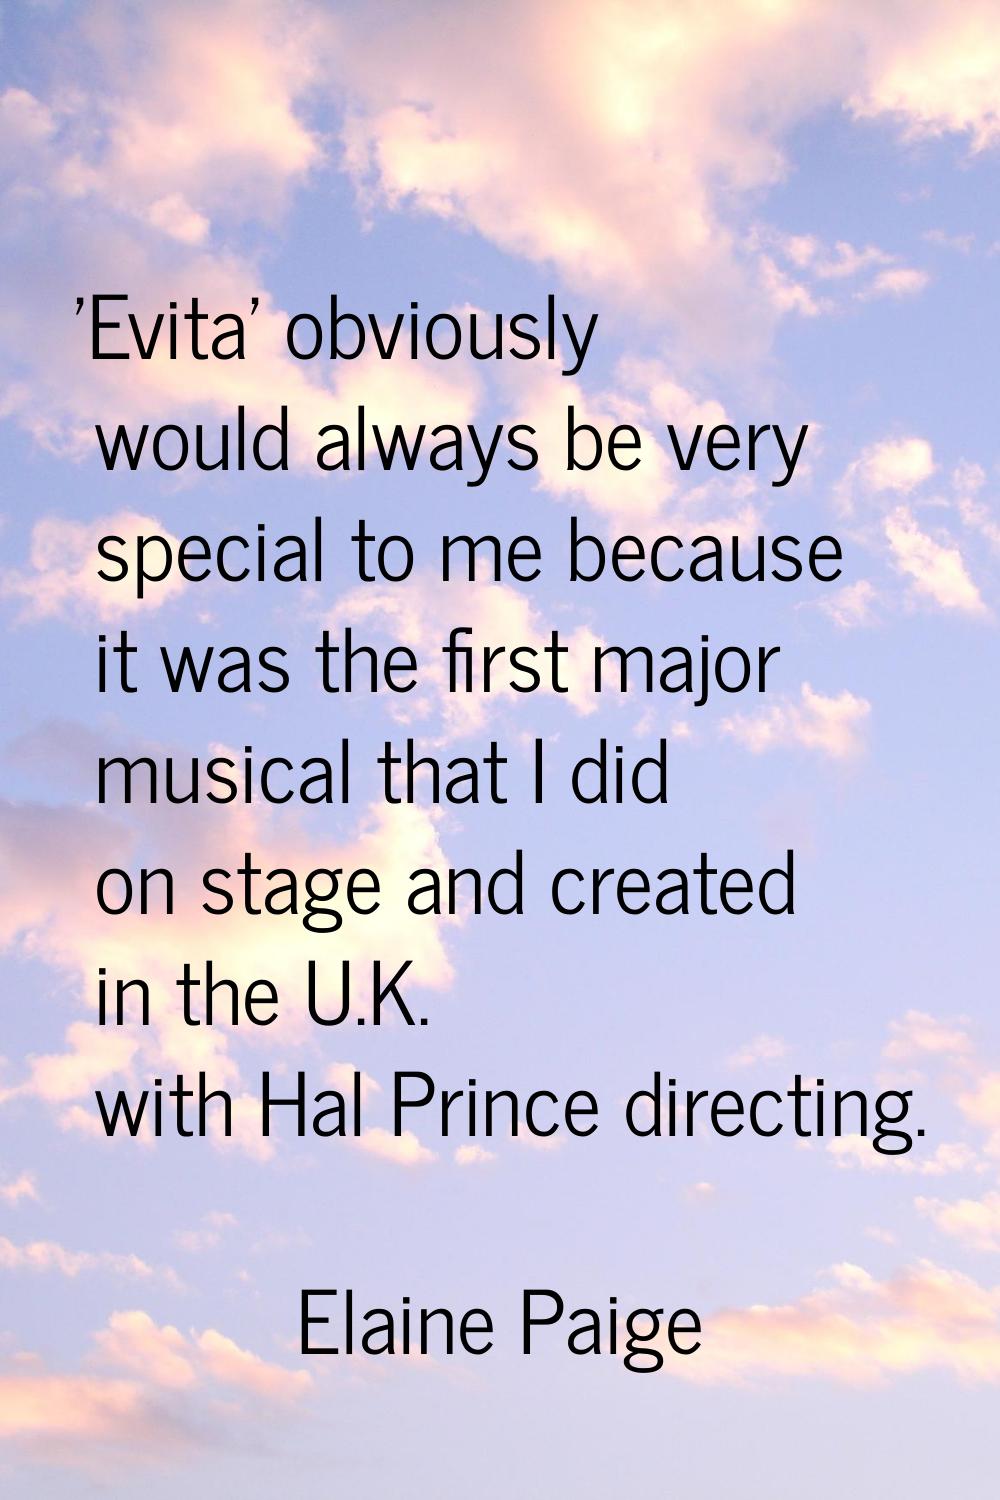 'Evita' obviously would always be very special to me because it was the first major musical that I 